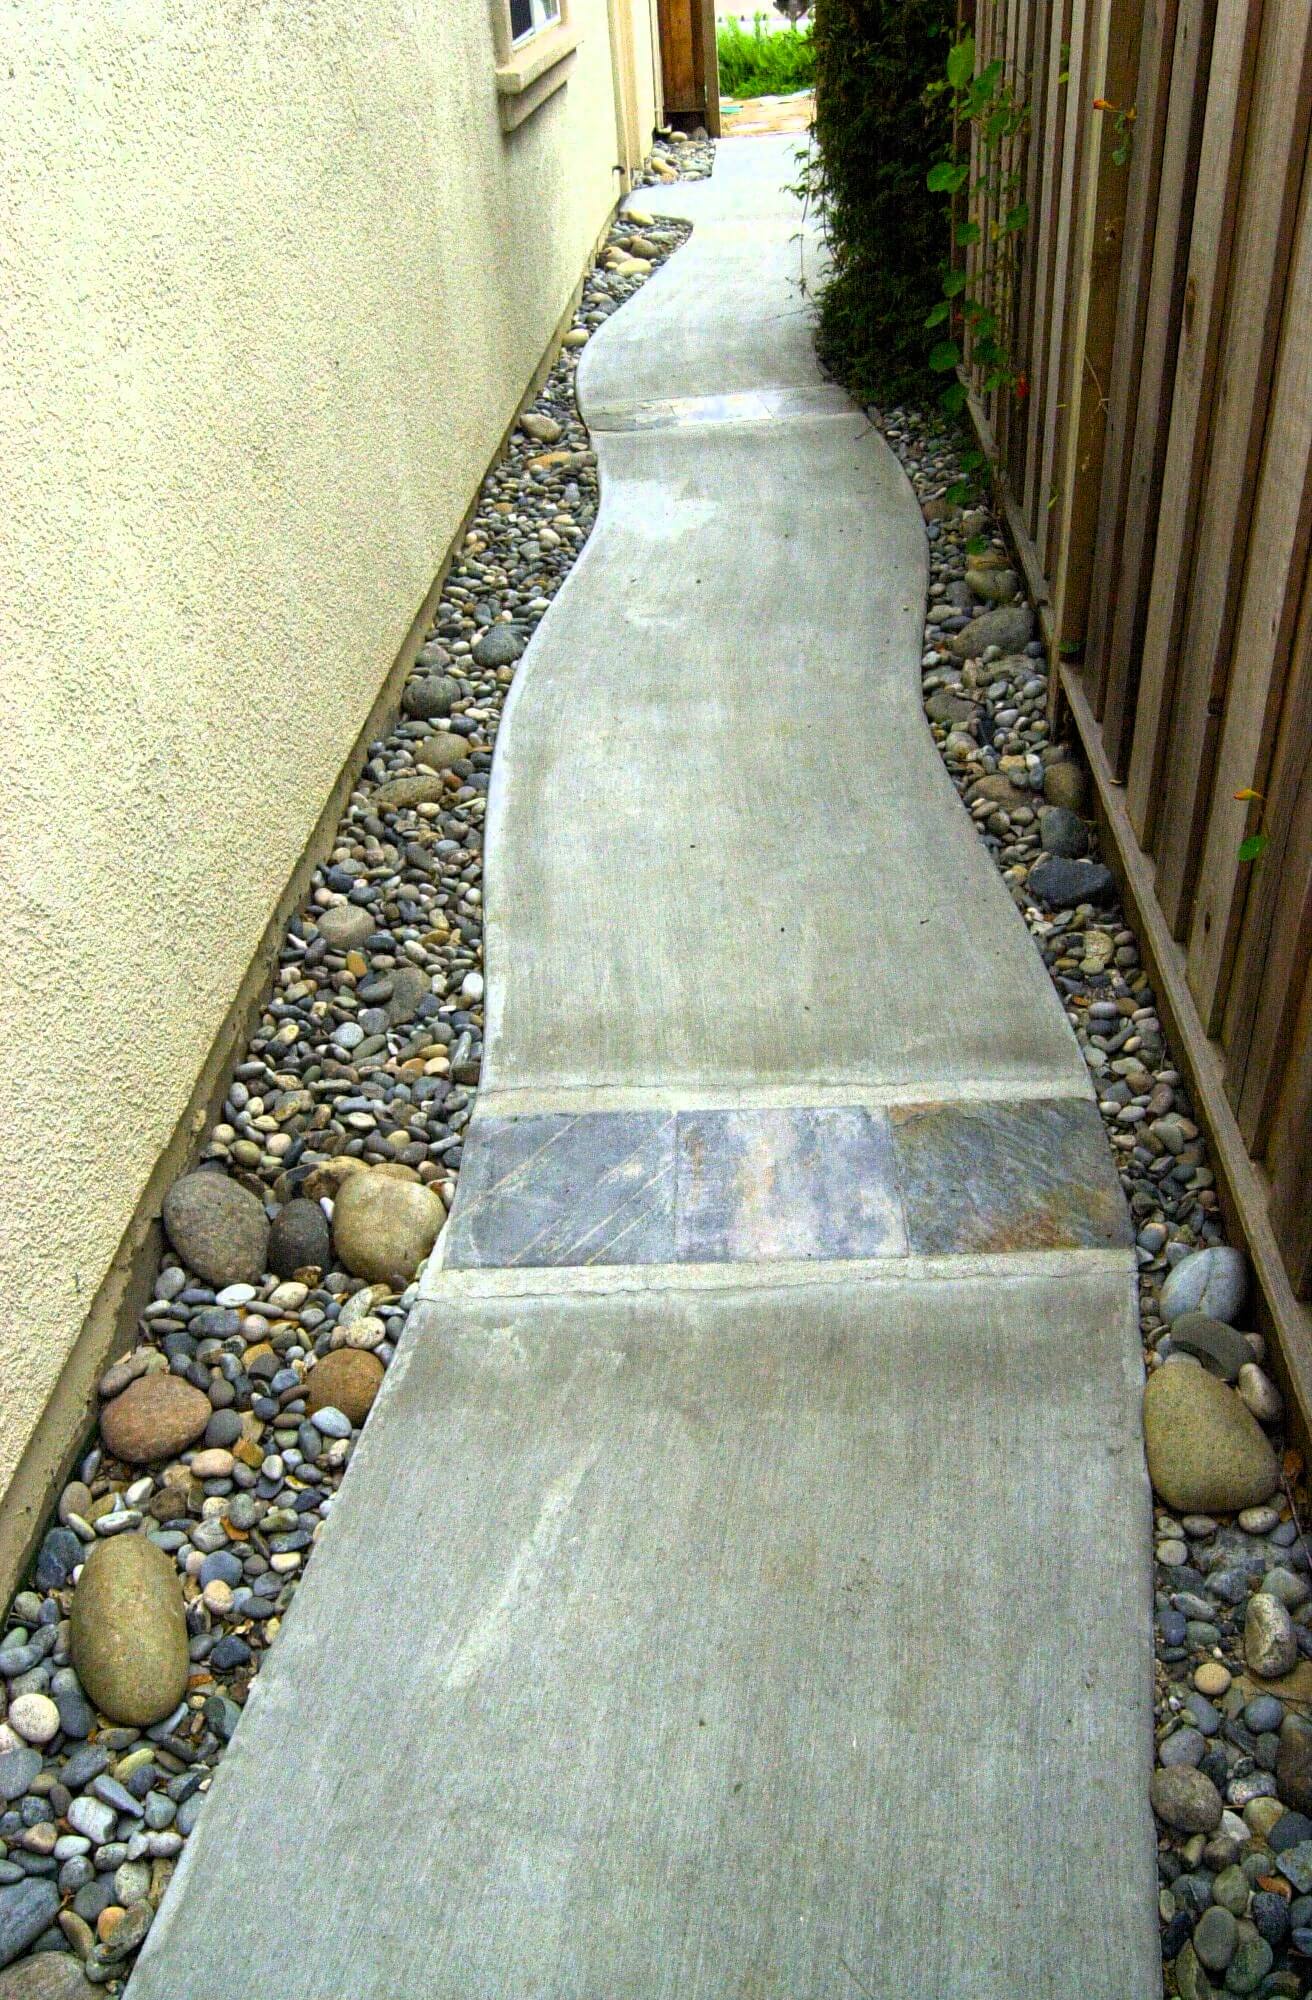 Curved and textured concrete pathway running down a narrow side yard with rocks and gravel on either side